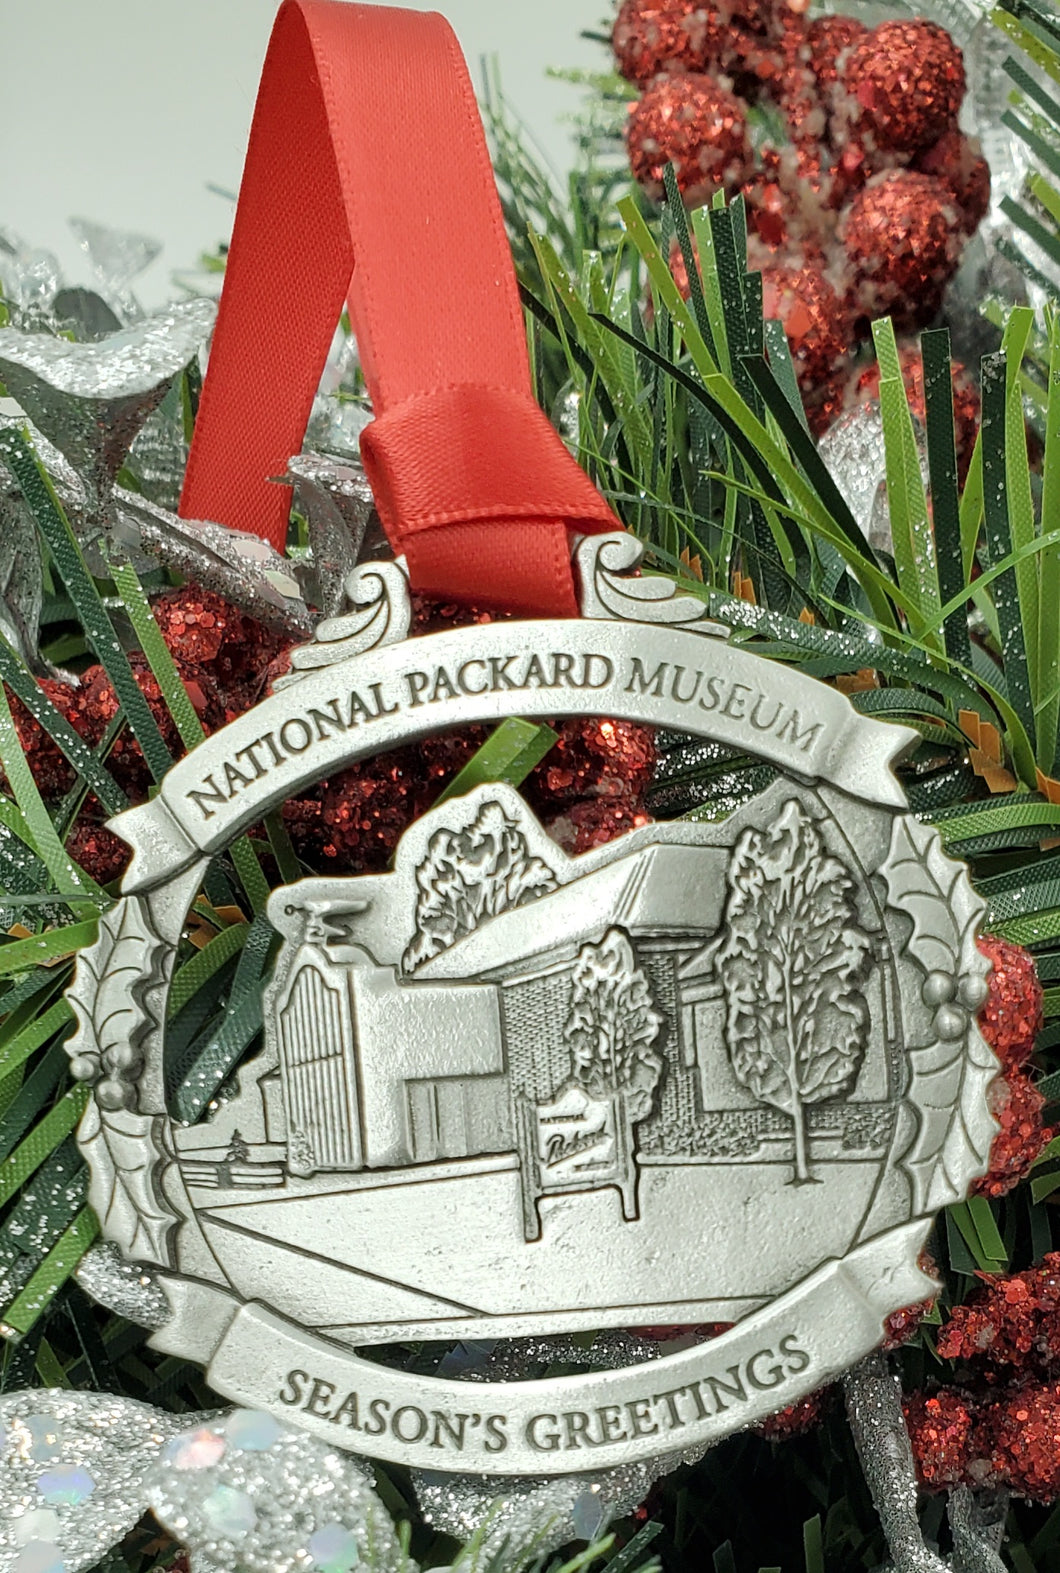 Pewter National Packard Museum Christmas Ornament $20.00